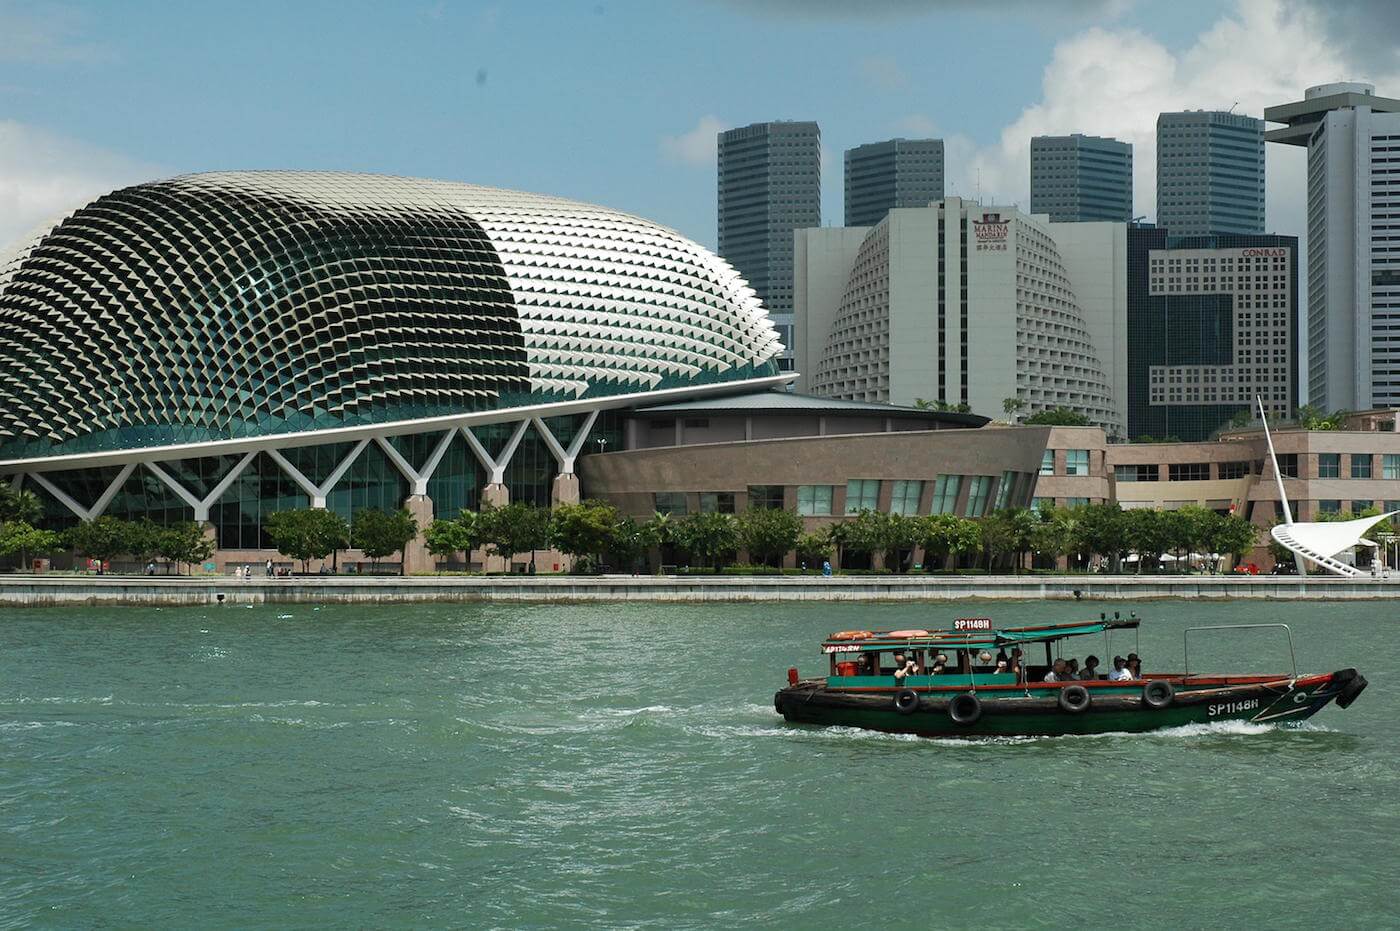 The Singapore River Cruise has some of the best sights of Marina Bay (pictured: Esplanade) Source: Jpatoka